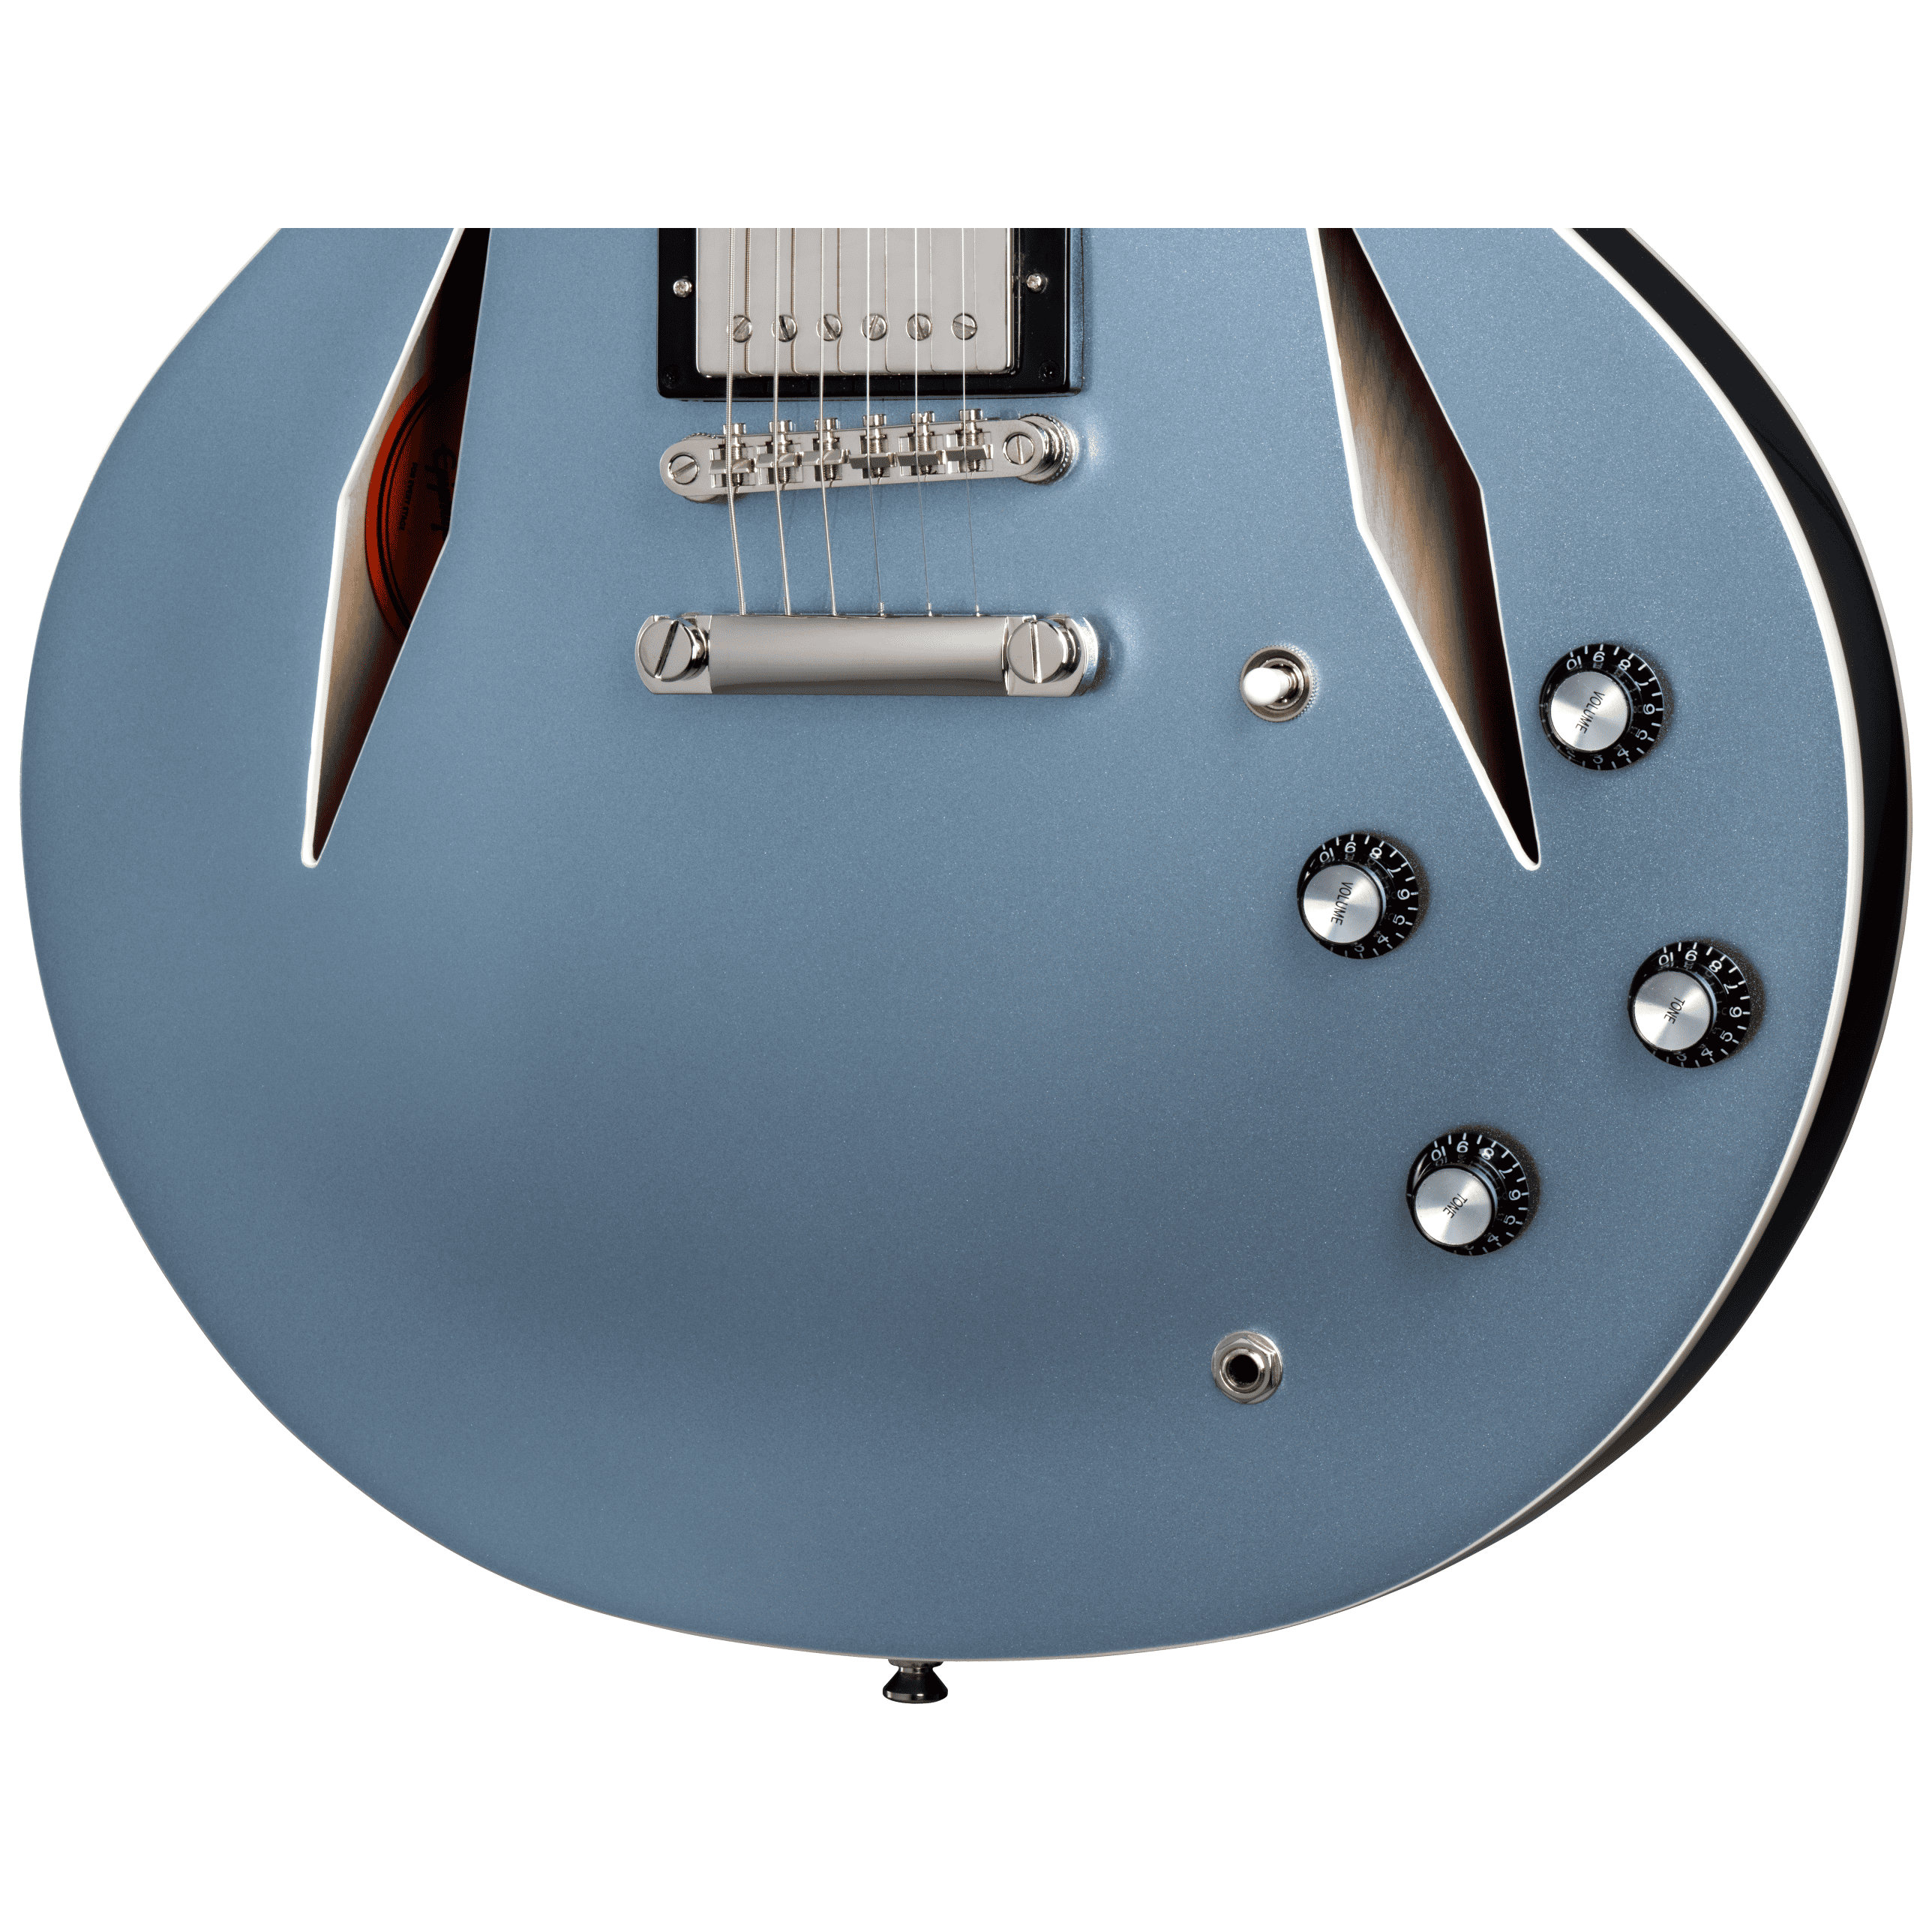 Epiphone Dave Grohl DG-335 5